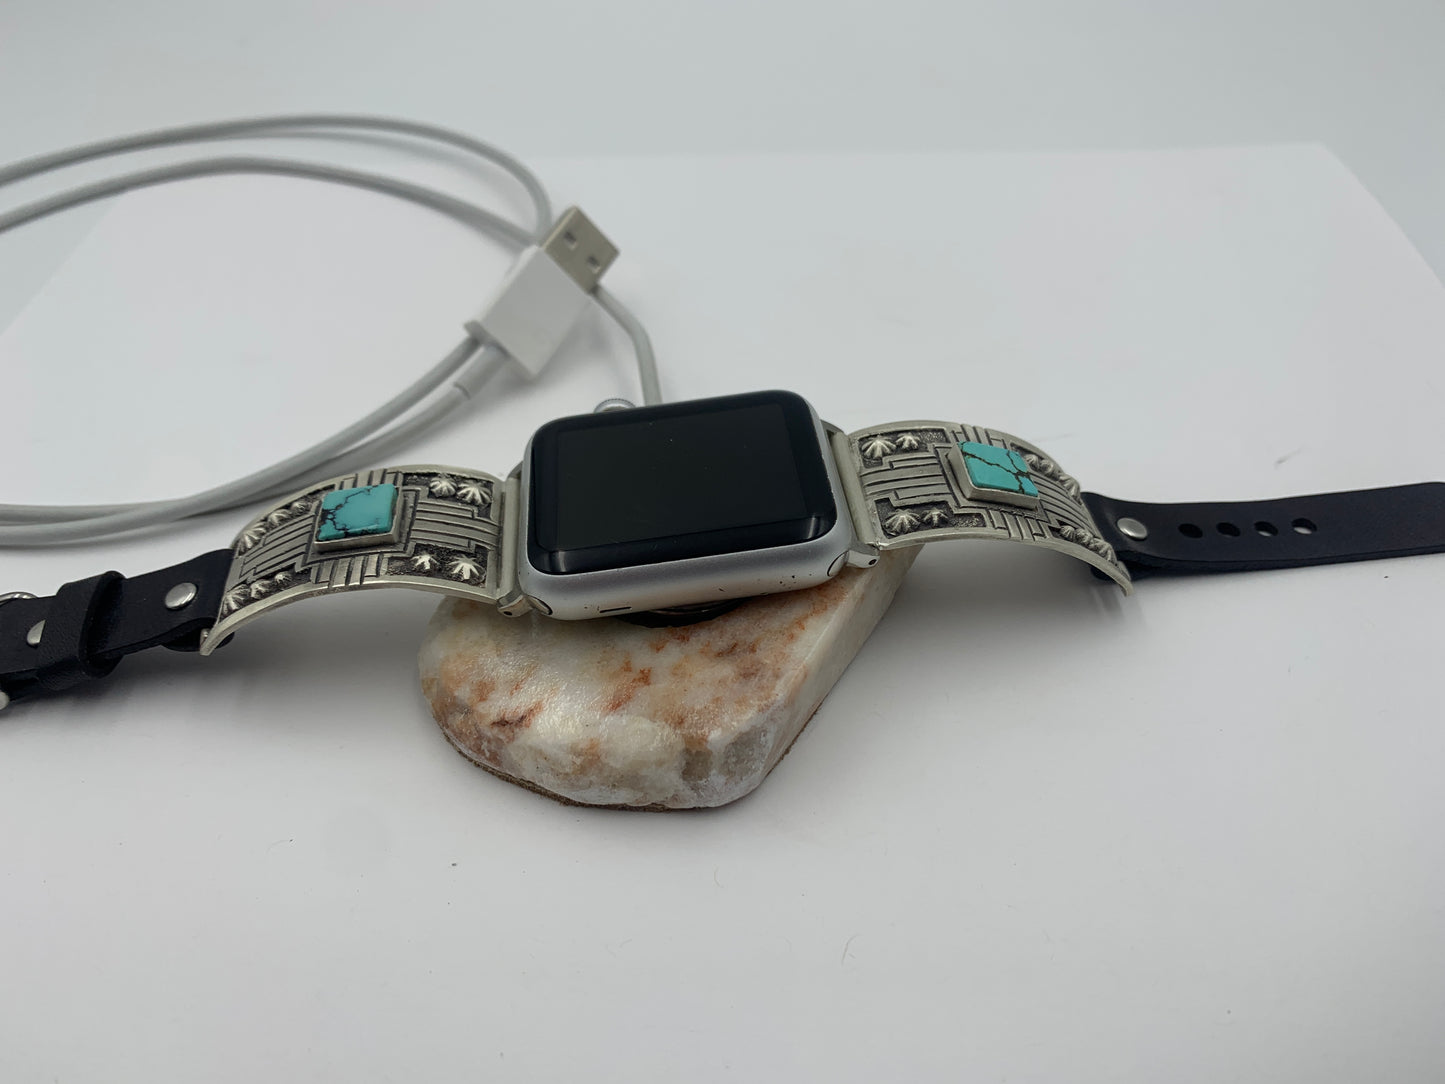 Native American Apple WATCH Charging Stone (JT49)